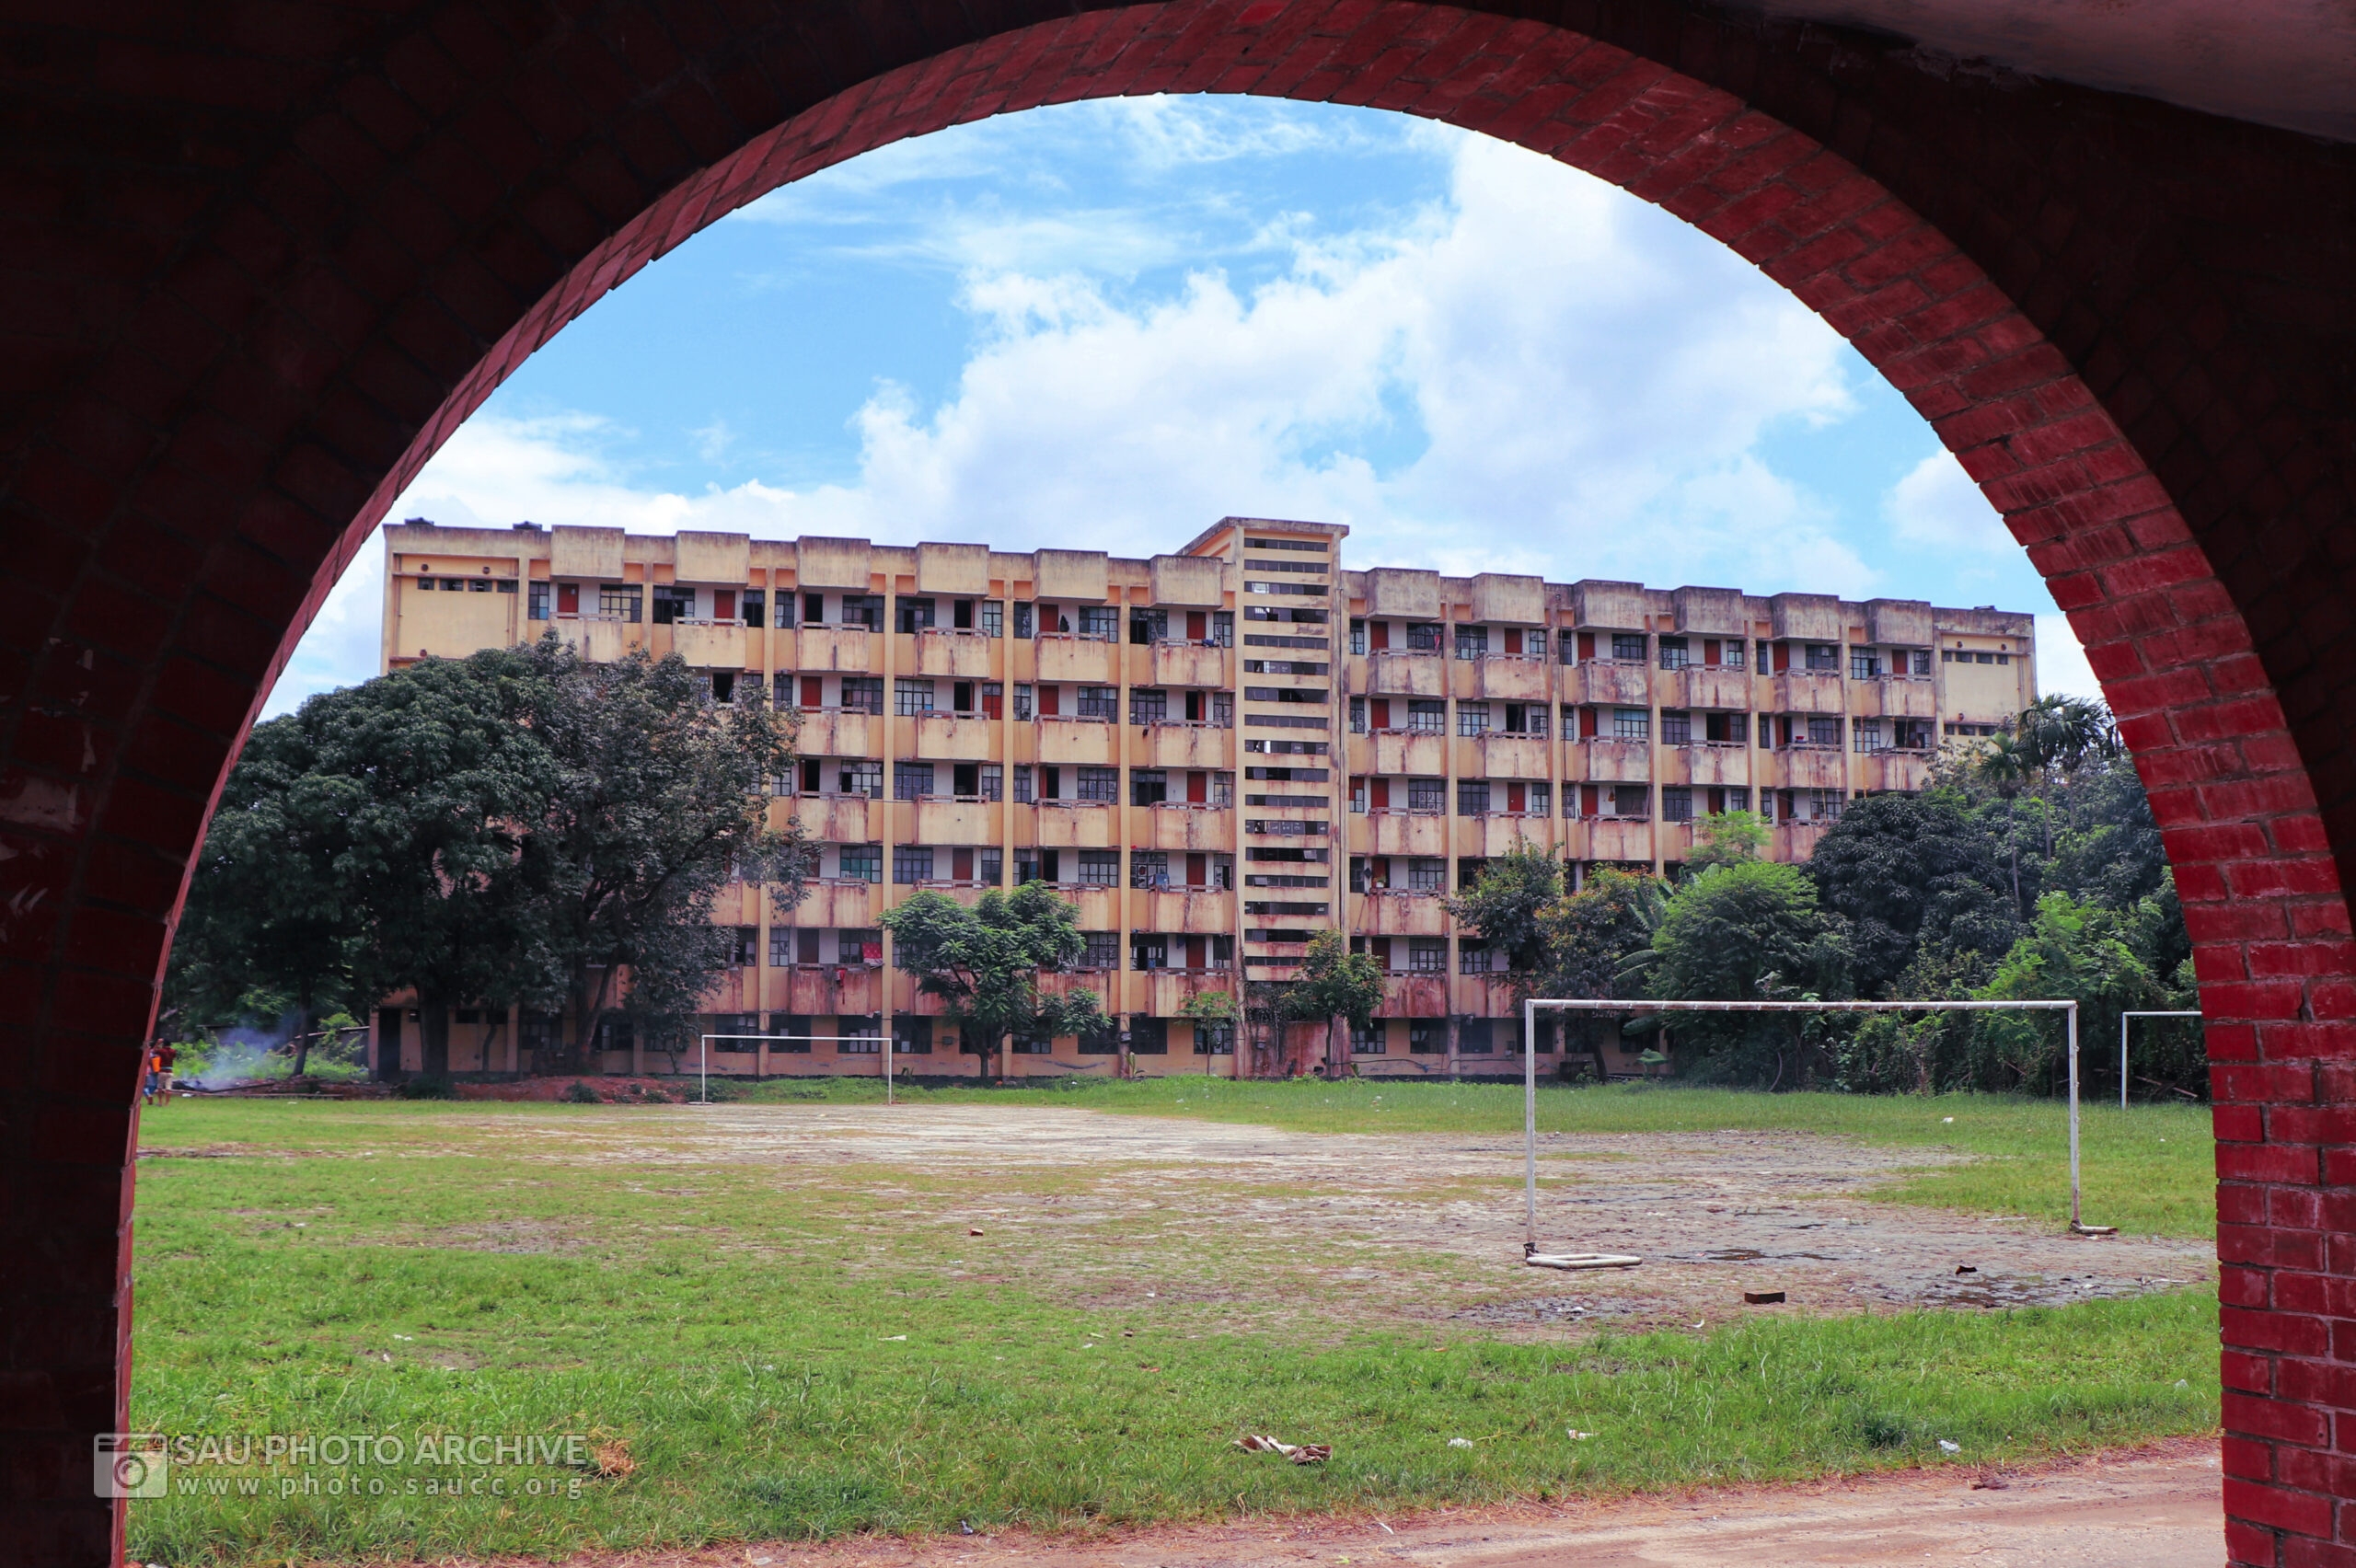 An Architectural photo is captured by Md. Nazmus Sakib Anik at Sher-e-Bangla Agricultural University titled One Hall to Another